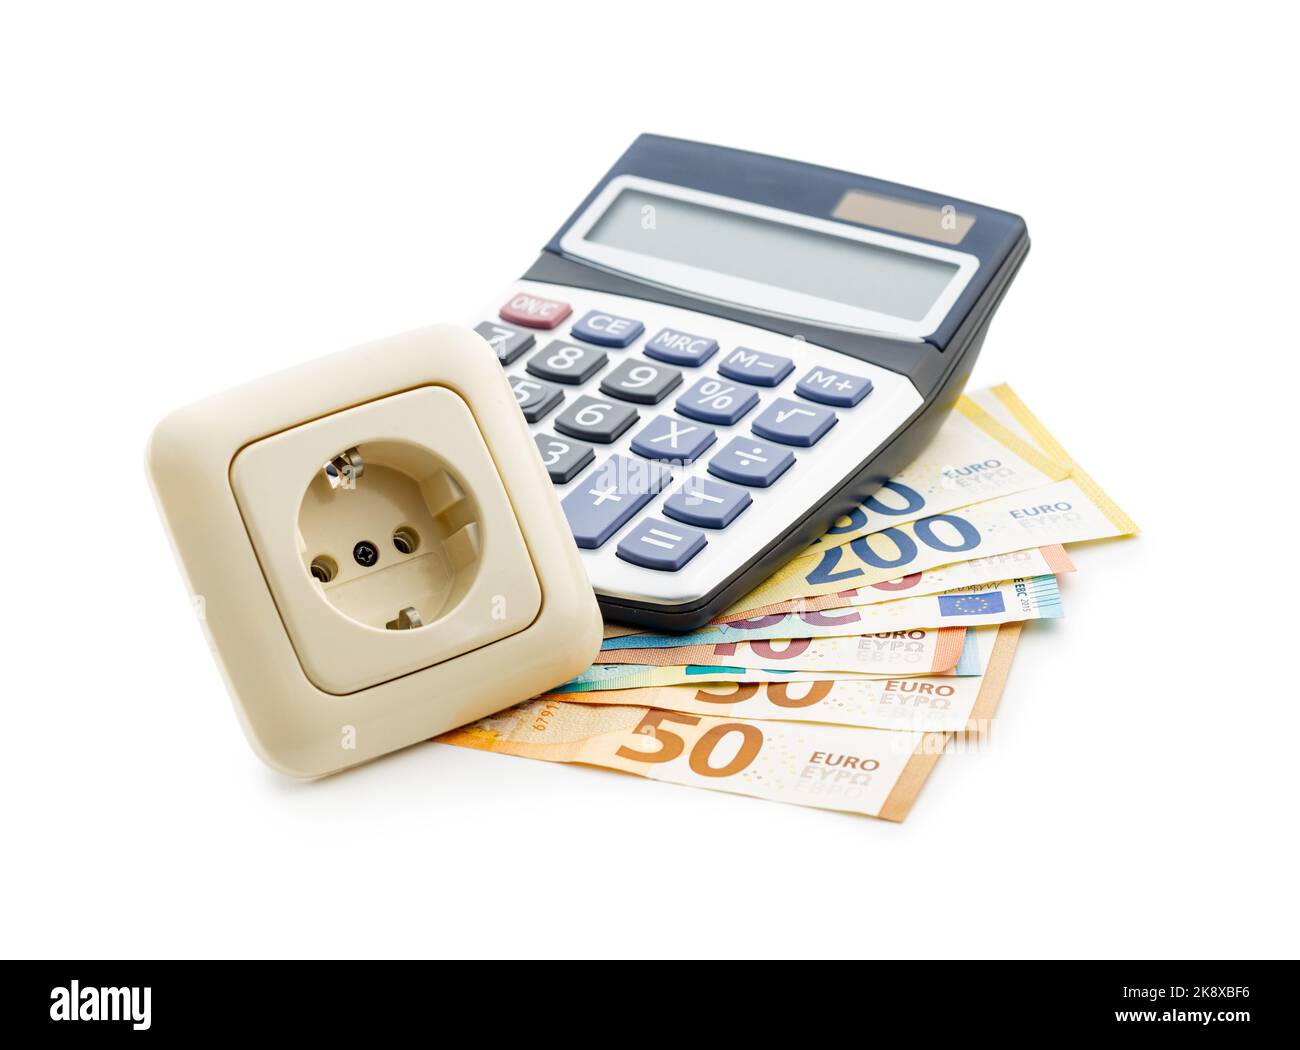 The energy savings concept with electric power socket, calculator and euro money isolated on the white background. Stock Photo